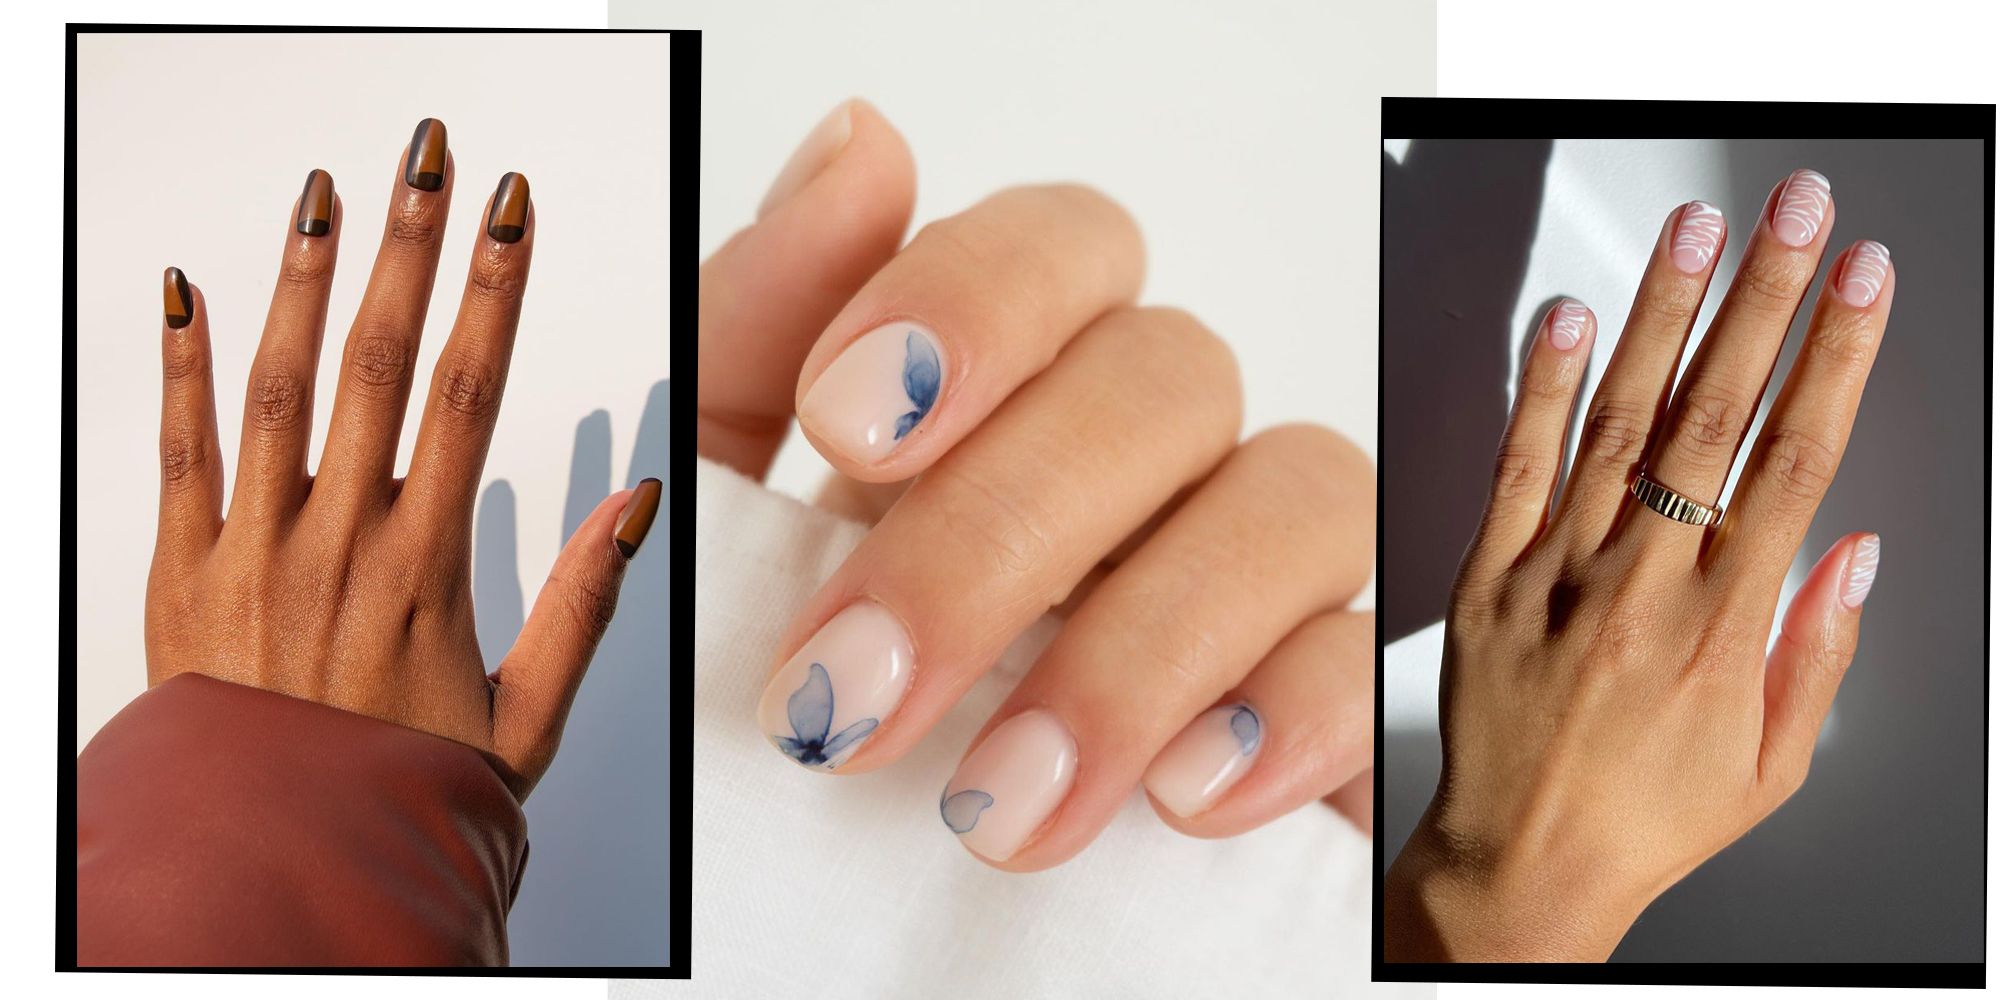 Nail Inspiration: Tribal and Art Deco on Pinterest